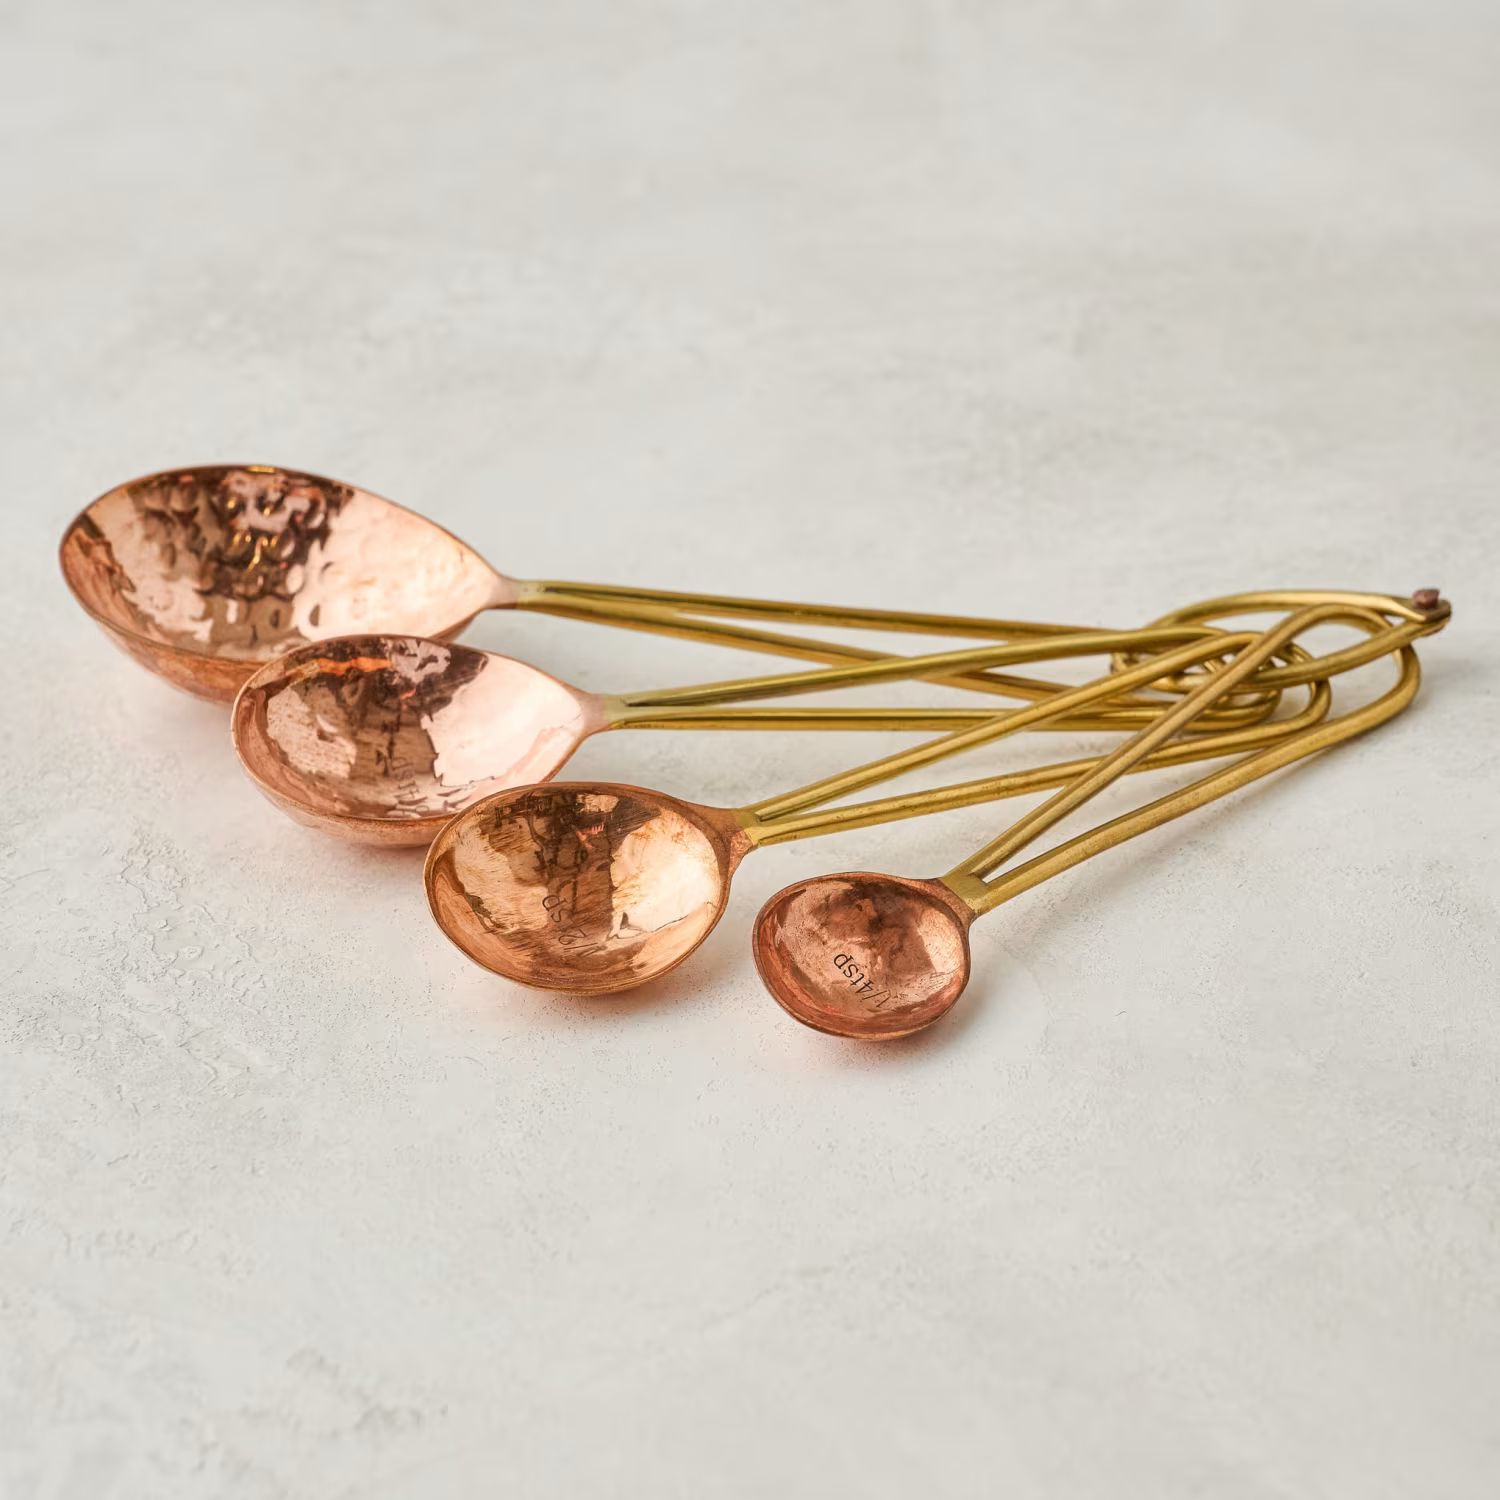 Hammered Copper and Gold Measuring Spoons | Magnolia